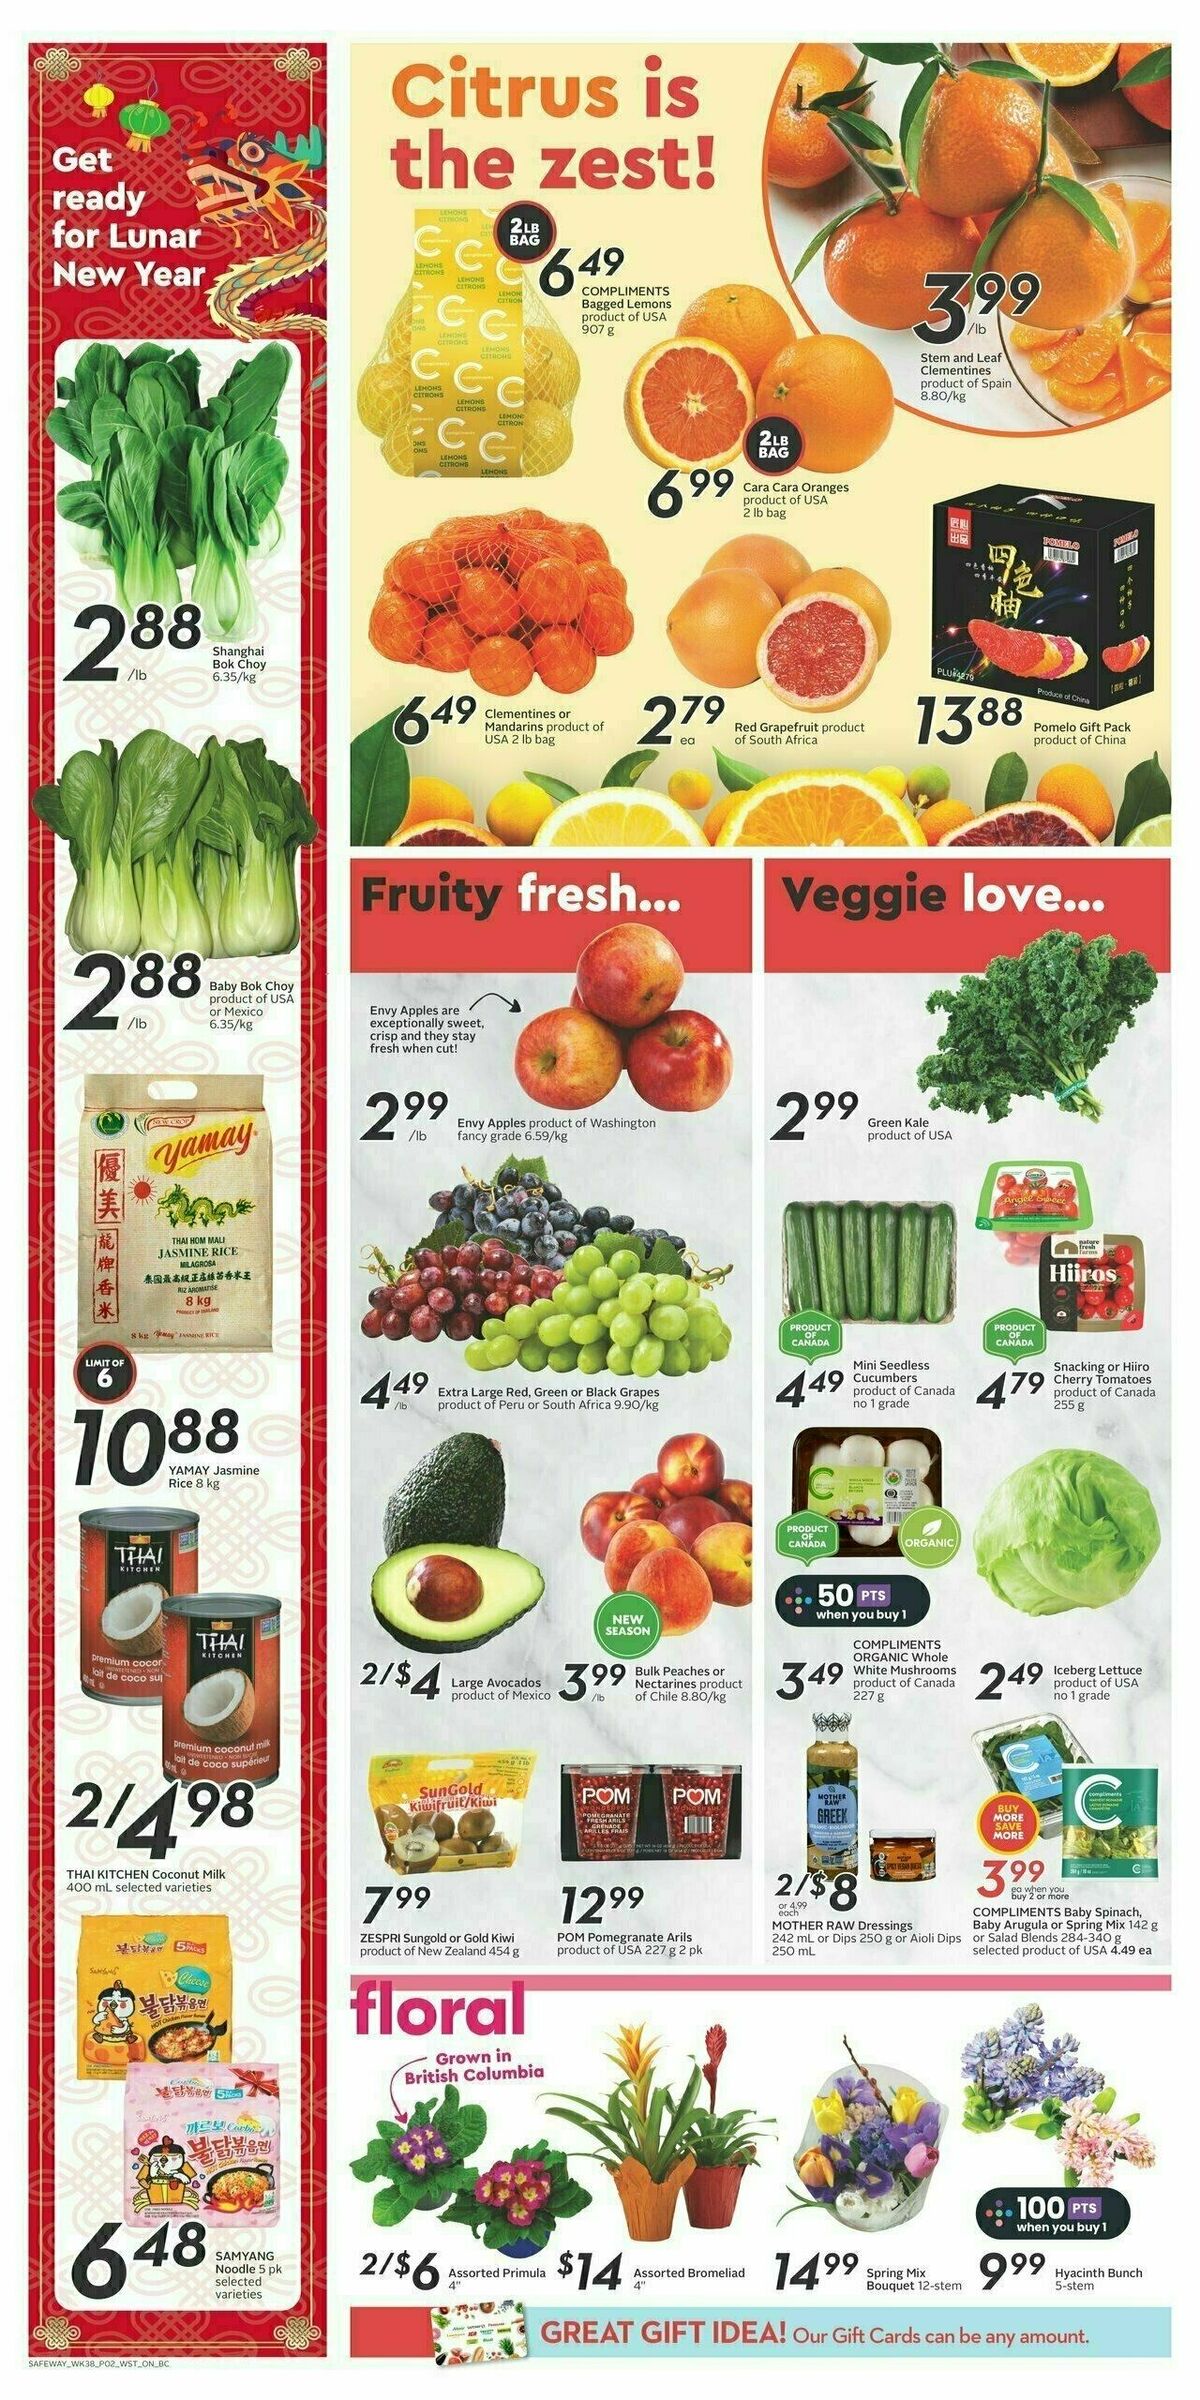 Safeway Flyer from January 18